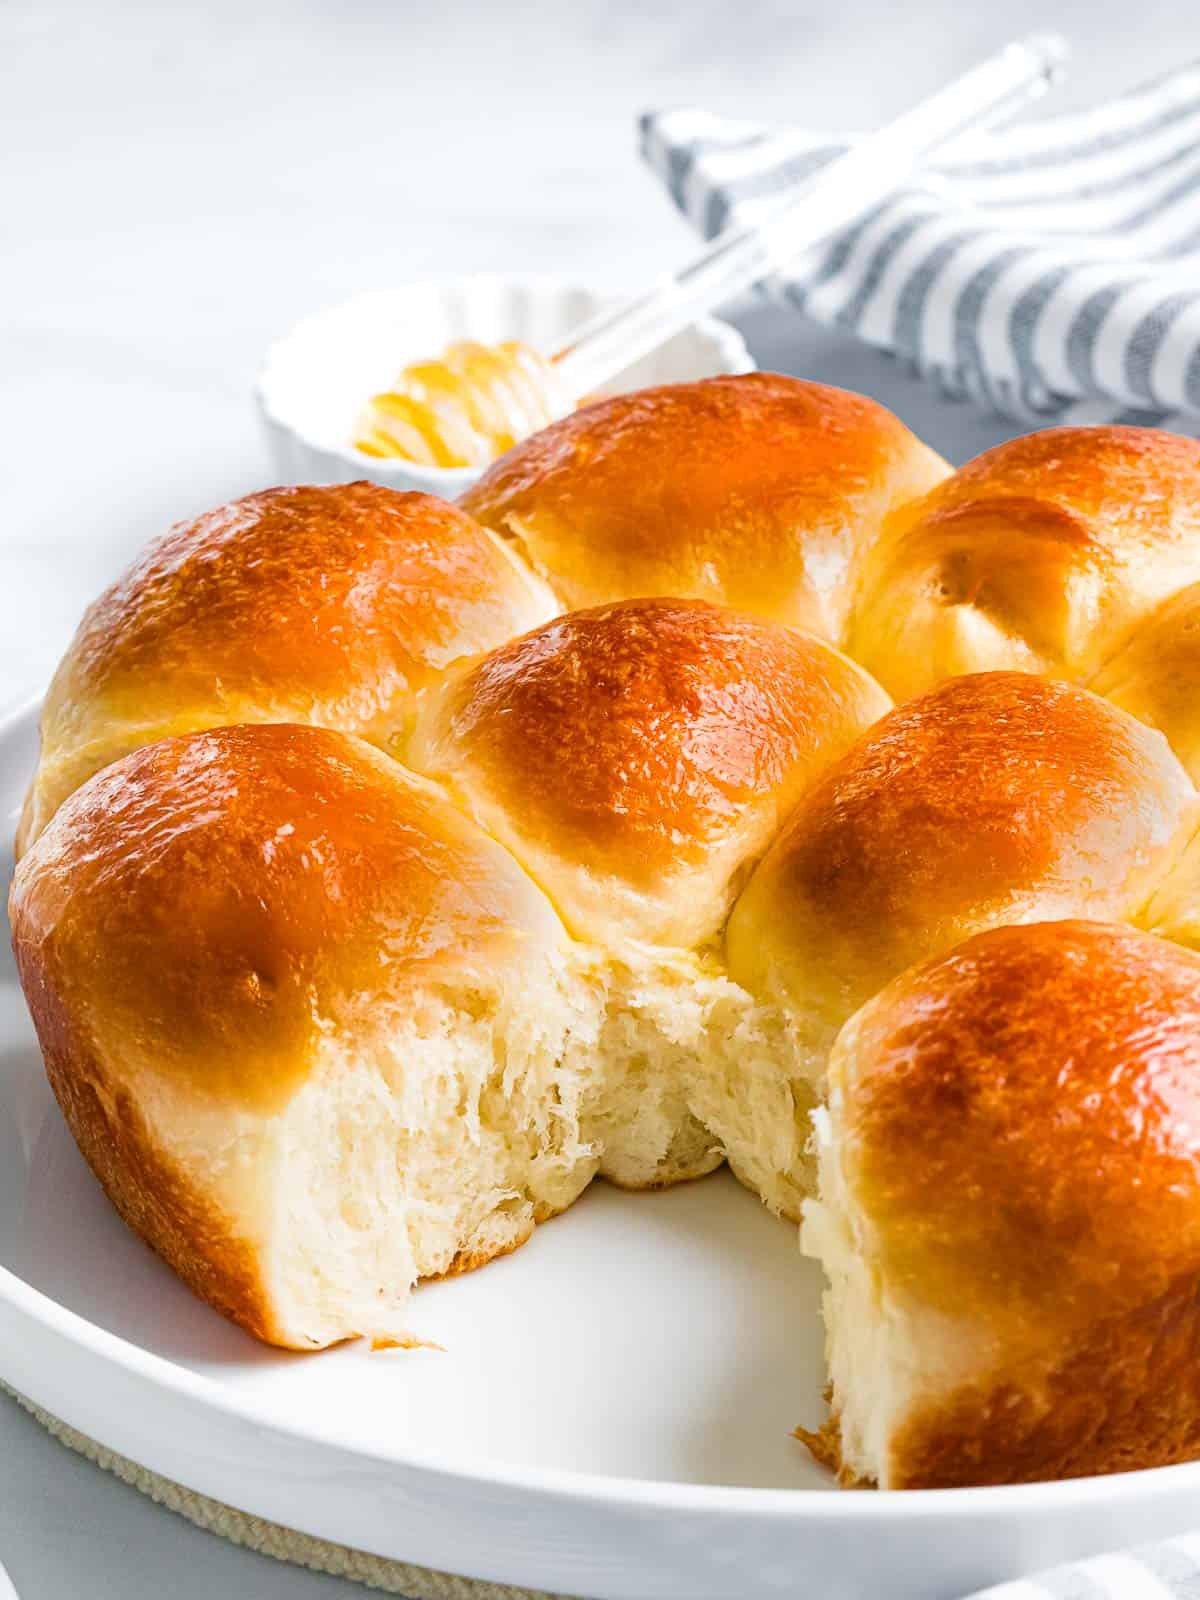 Soft and sweet brioche rolls with fluffy interior on a white plate.